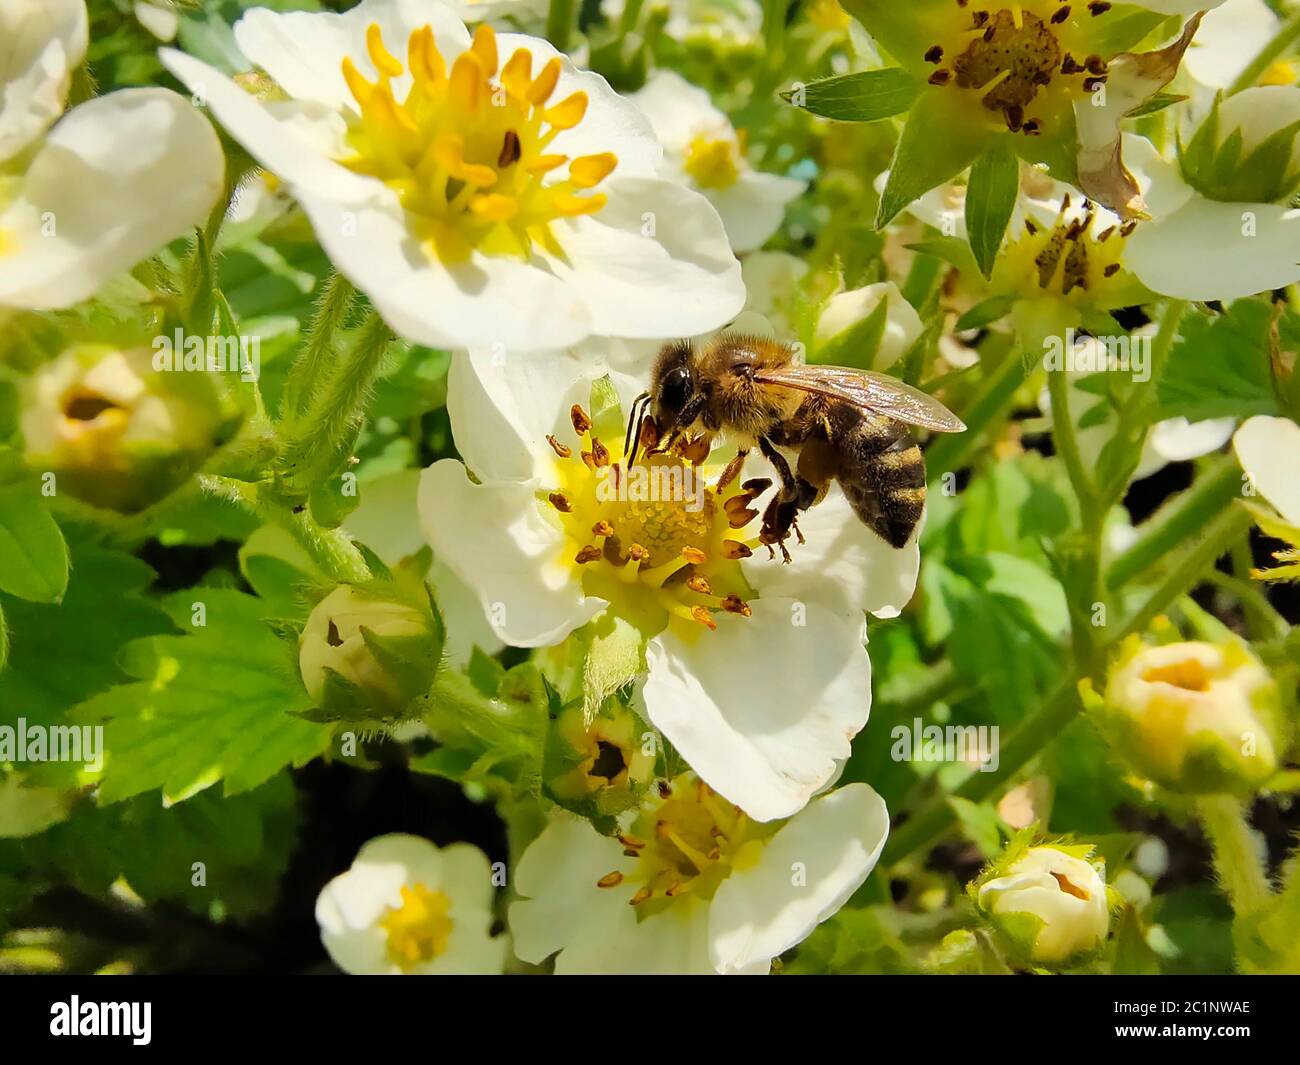 Honey bee collecting pollen from white flower Stock Photo